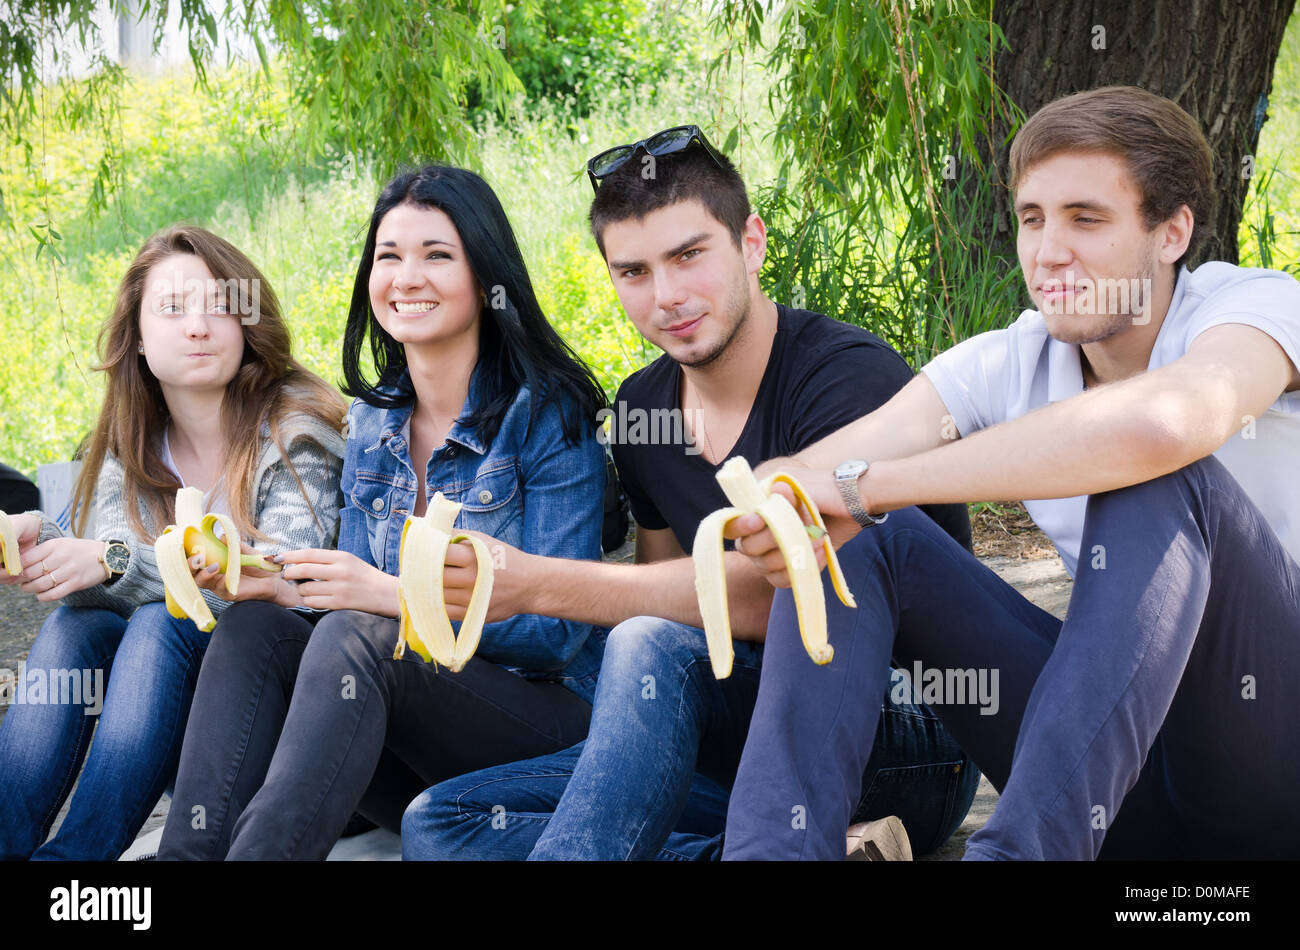 Row of young college friends sitting together watching an event with focus to the middle couple Stock Photo